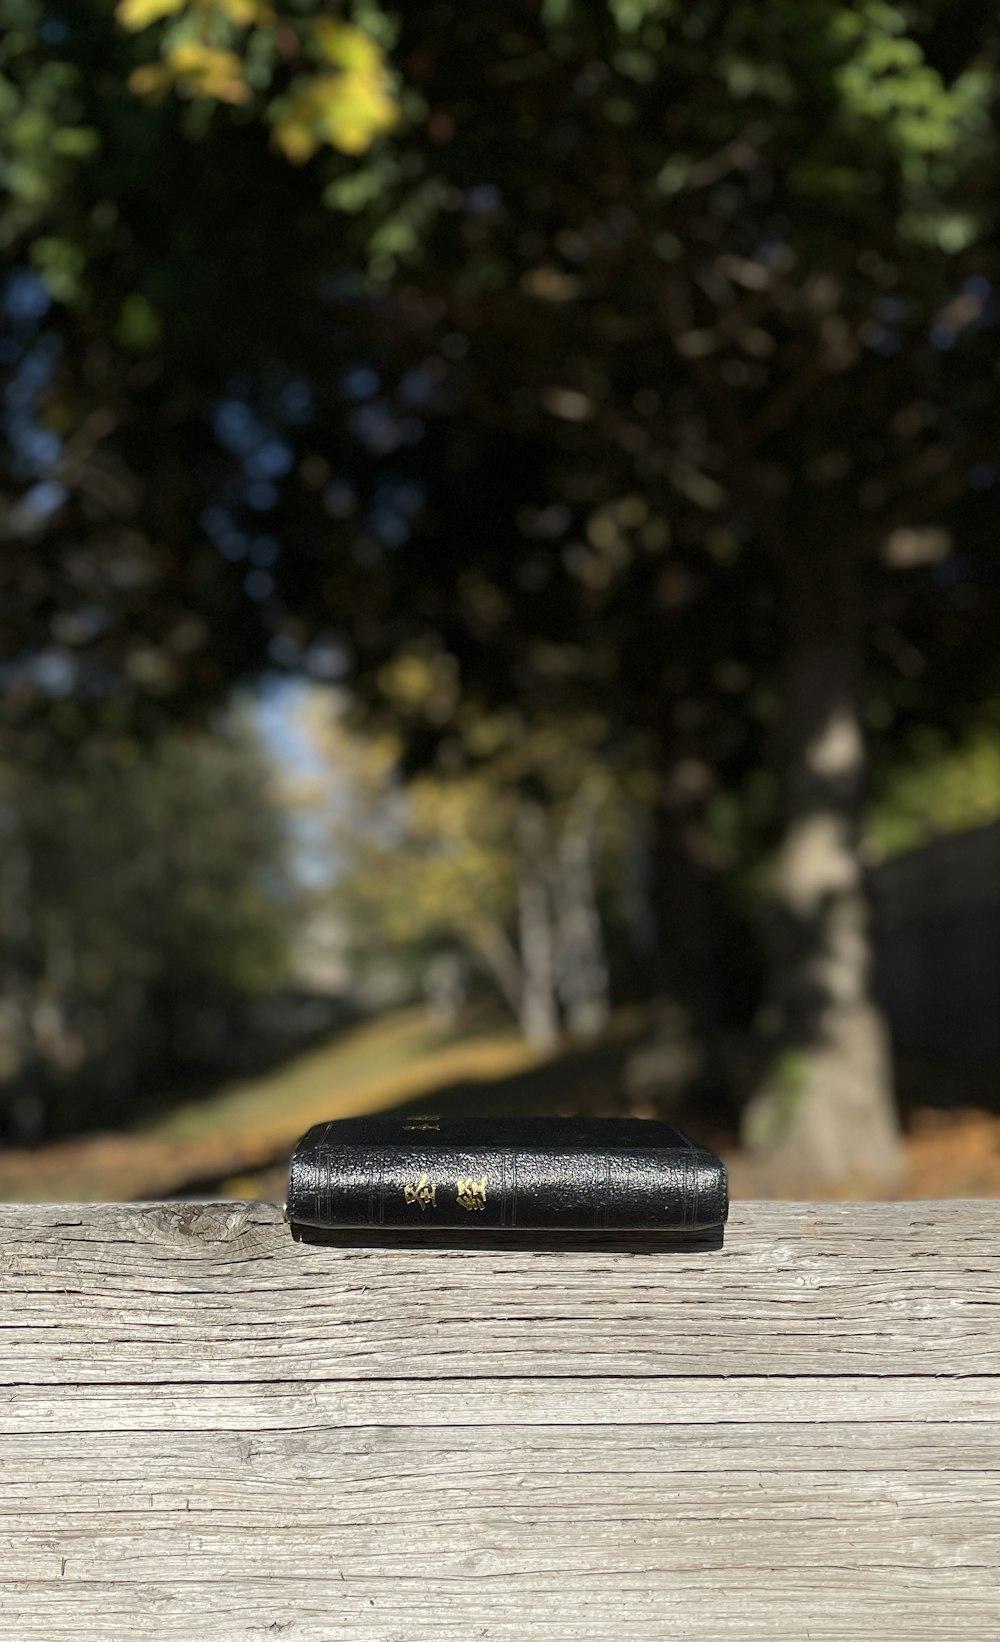 a black lighter on a wooden surface